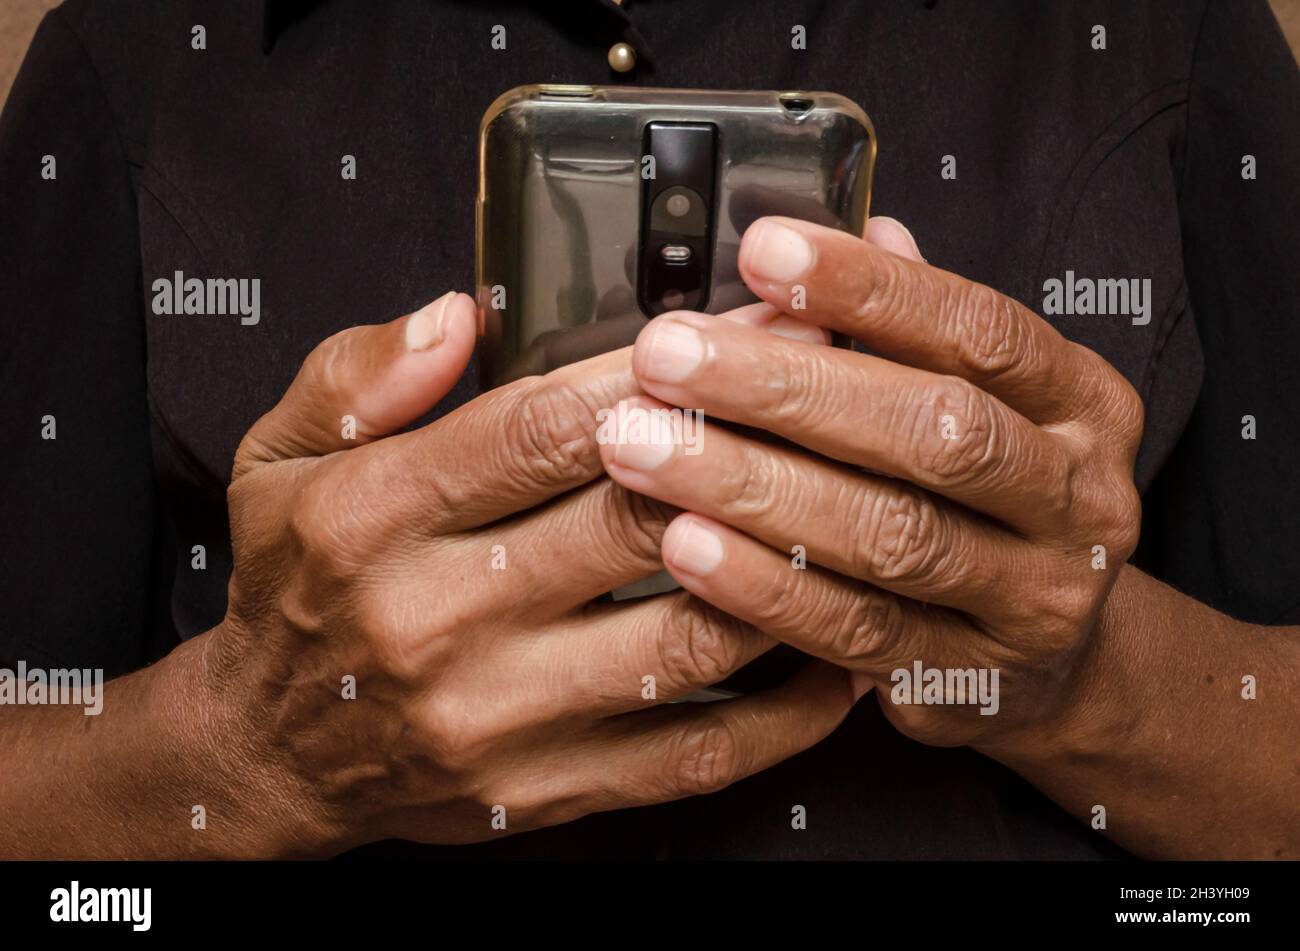 Hands Of A Jamaican Woman Who's Over Fifty-five Holds A Mobile Phone Stock Photo